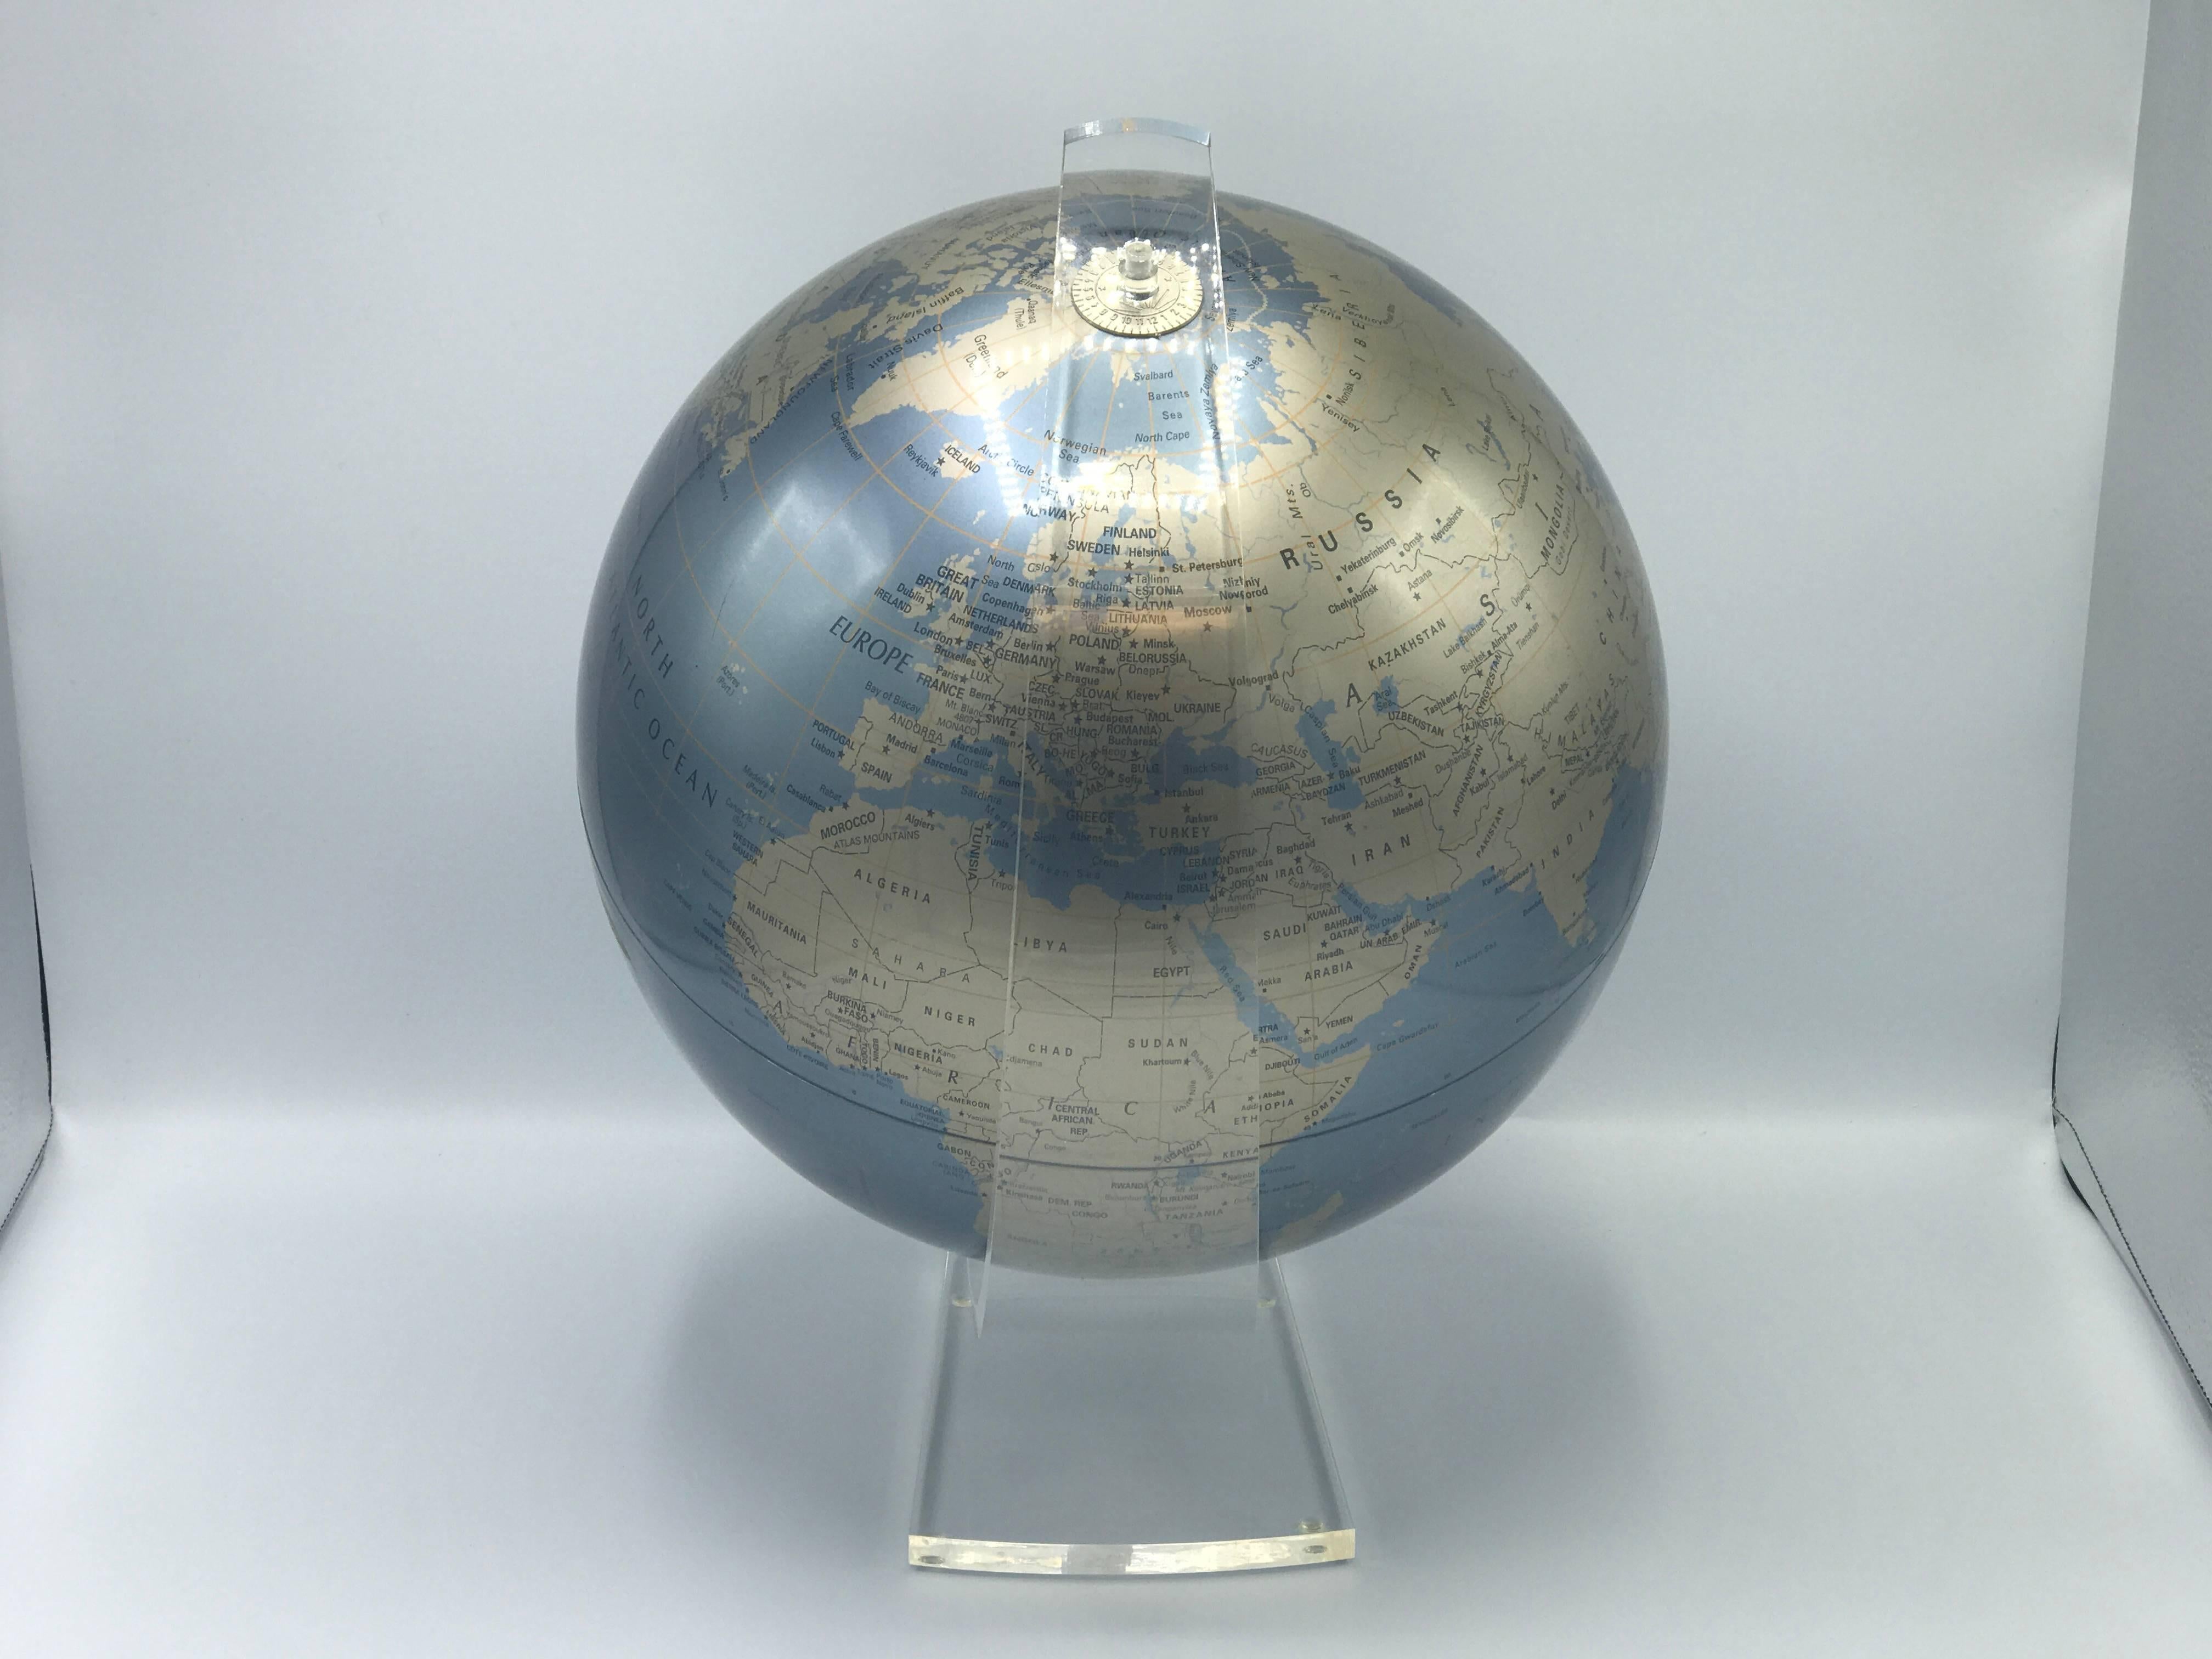 Offered is a gorgeous, 1960s globe on a sculptural Lucite stand. The globe is a beautiful metallic blue and gold.